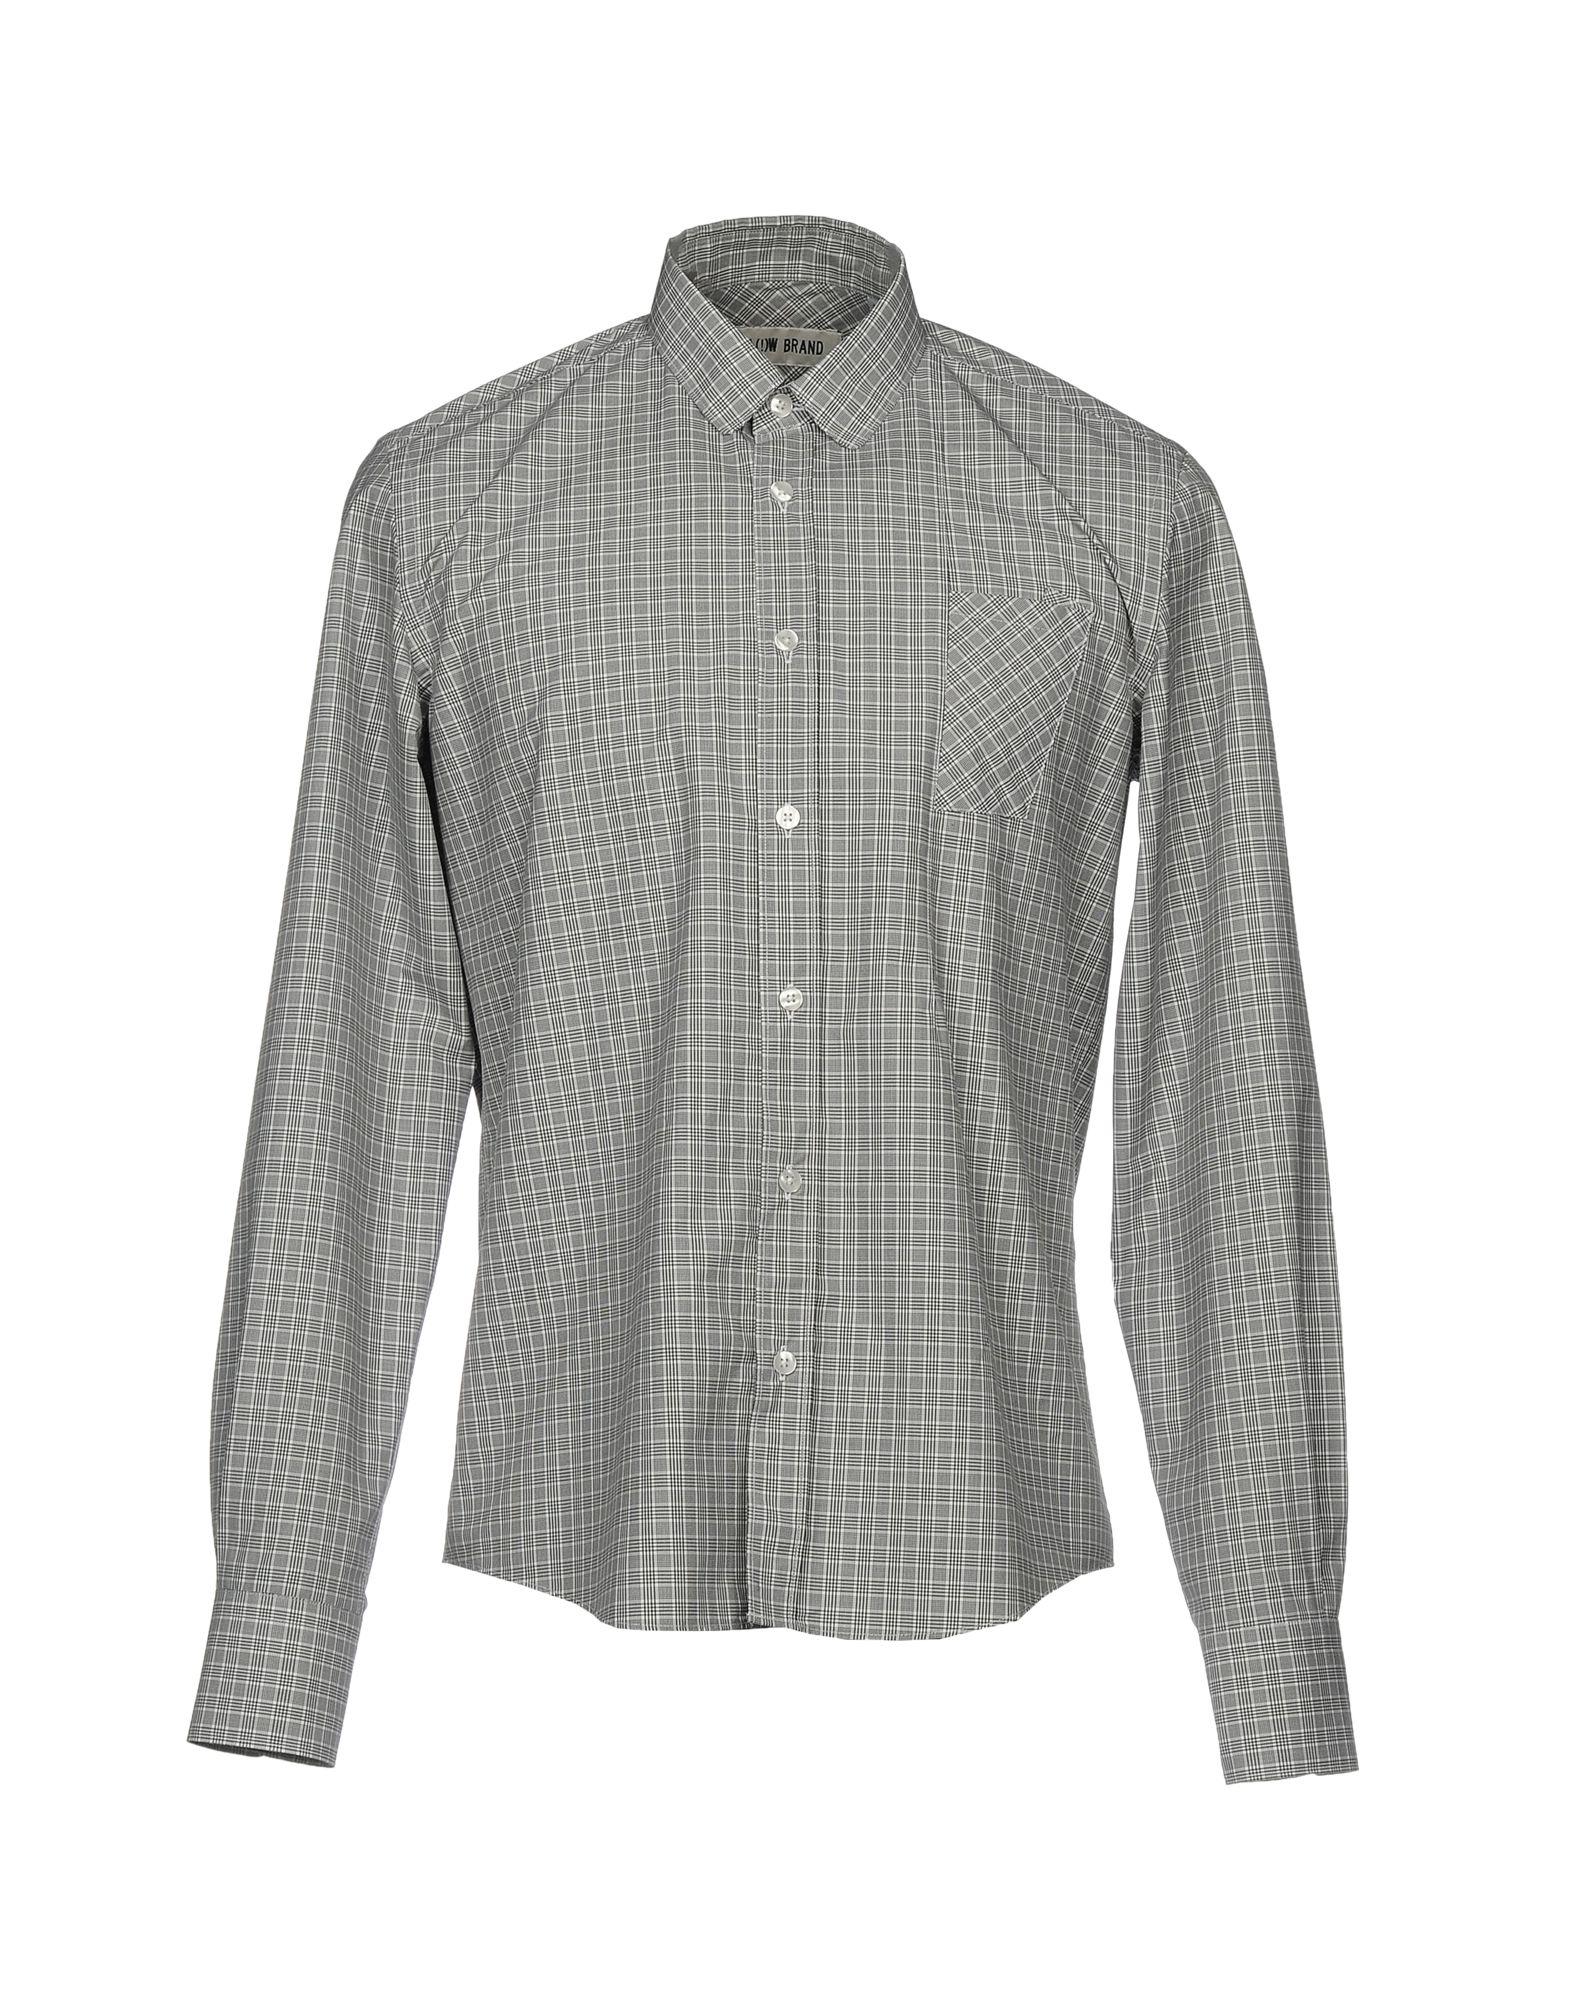 Low Brand Checked Shirt In Grey | ModeSens